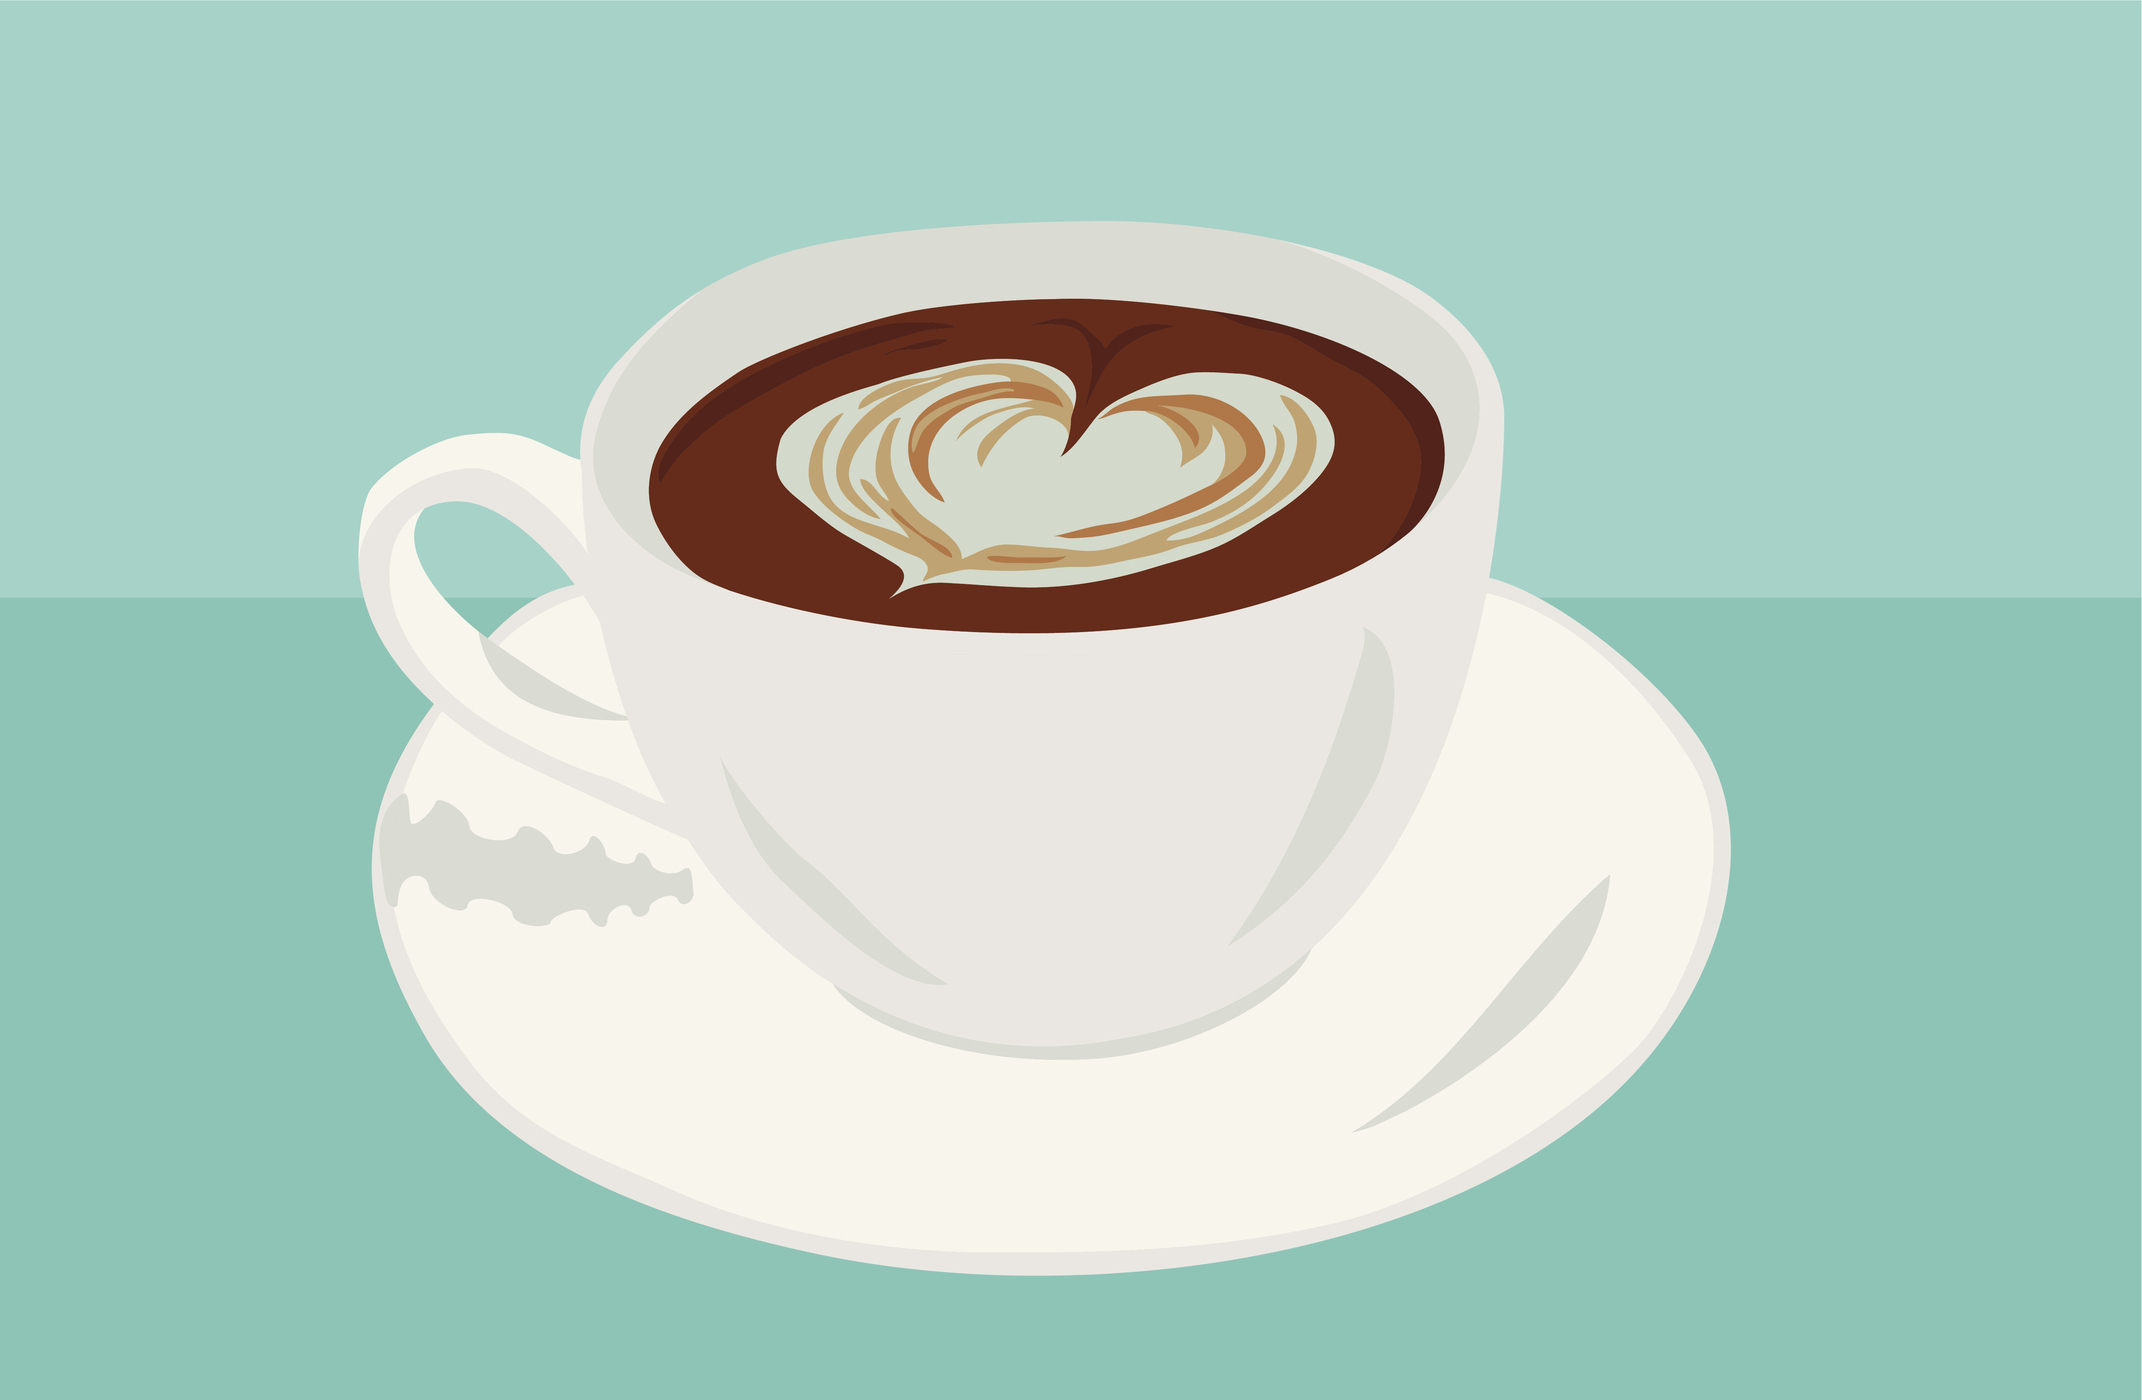 heart shape in coffee vector illustration (Getty Images)